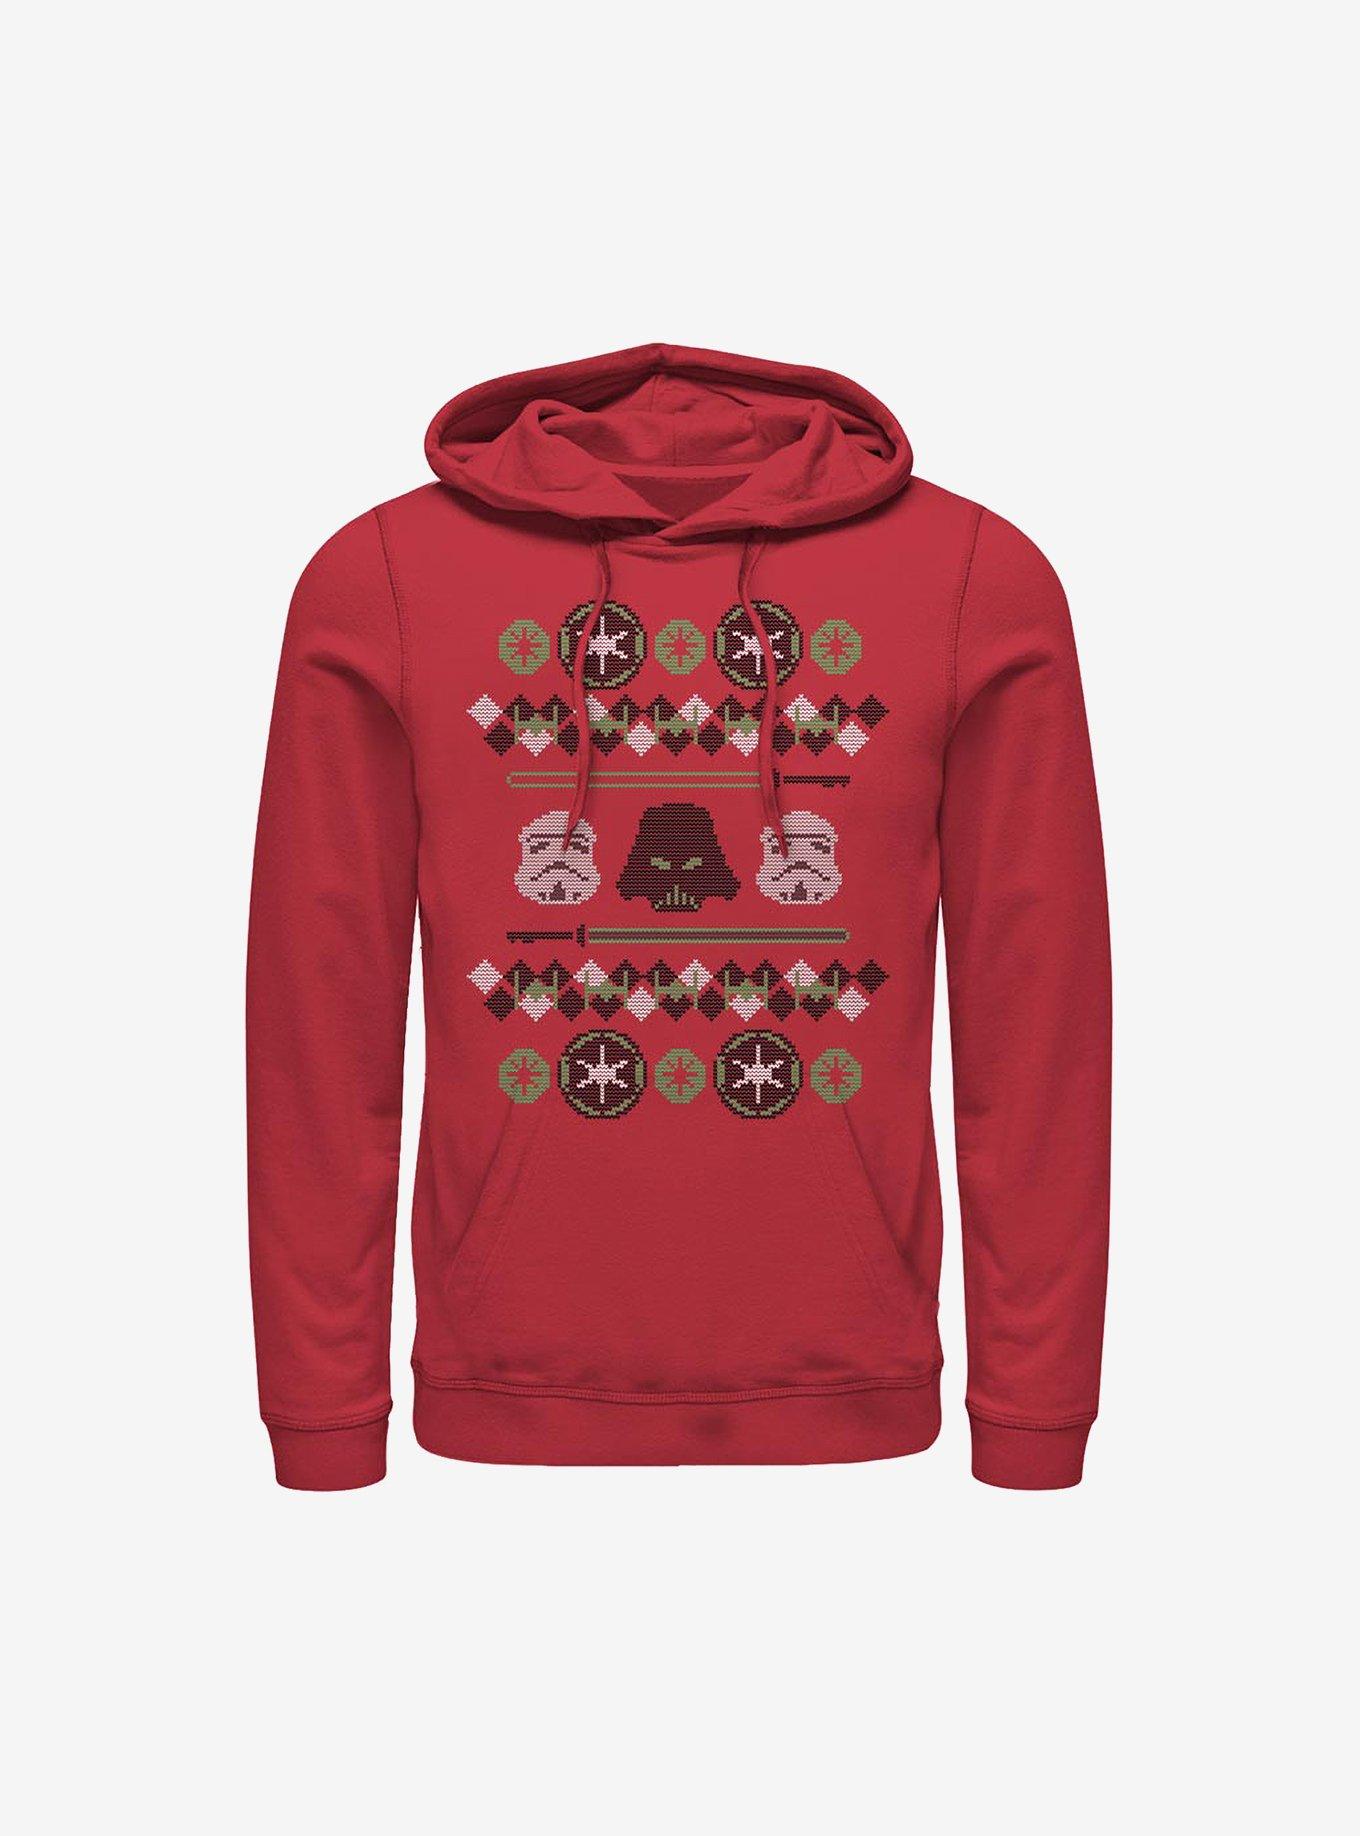 Star Wars Empire Holiday Ugly Christmas Sweater Hoodie, RED, hi-res